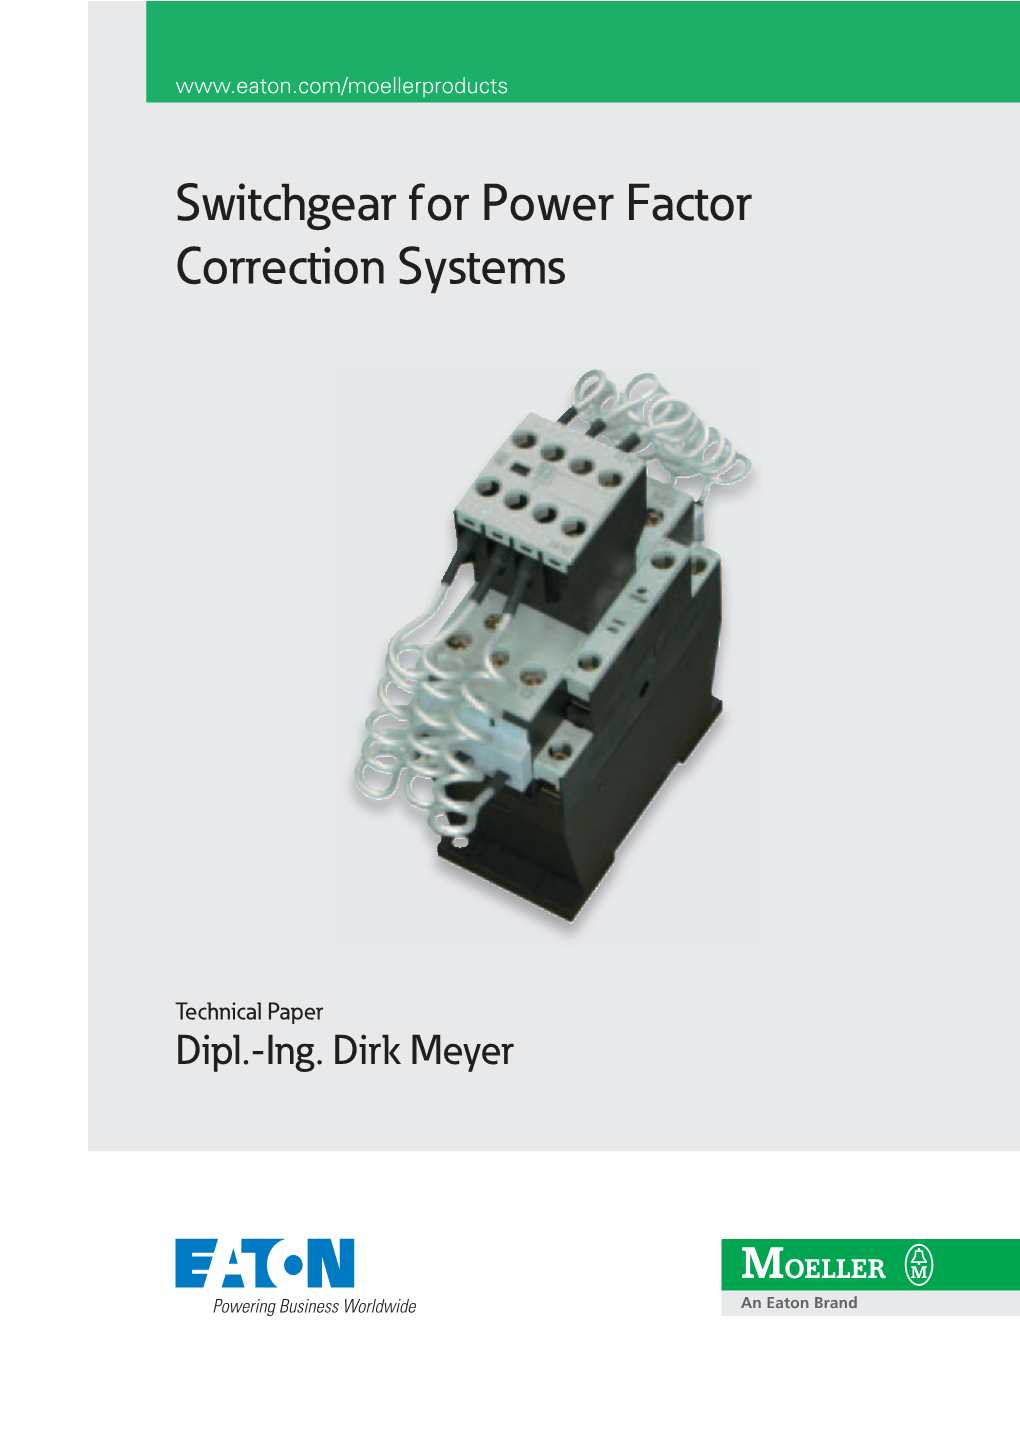 Switchgear for Power Factor Correction Systems